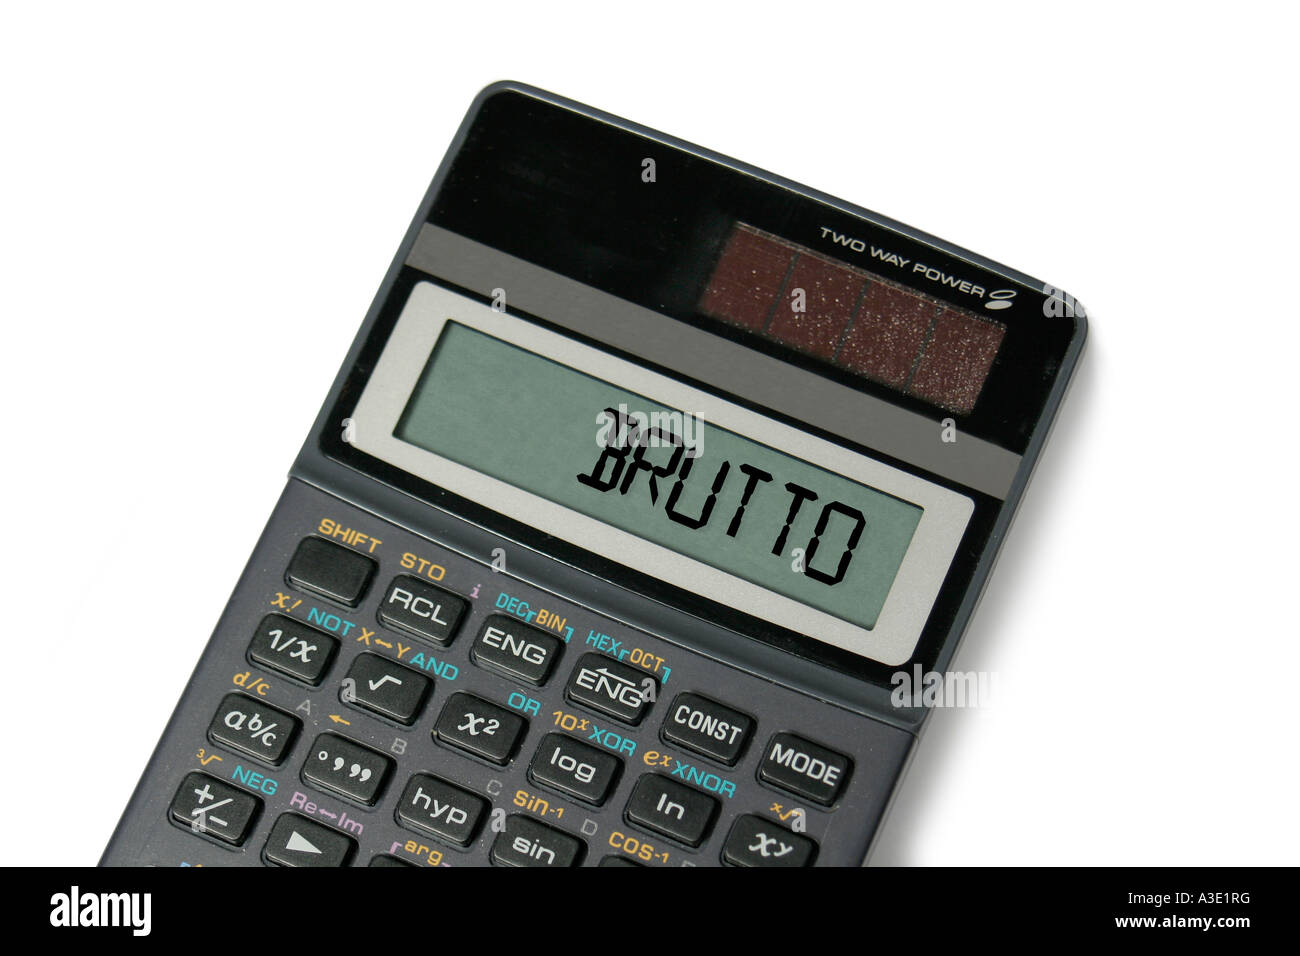 'Brutto' written in the Display of a calculator Stock Photo